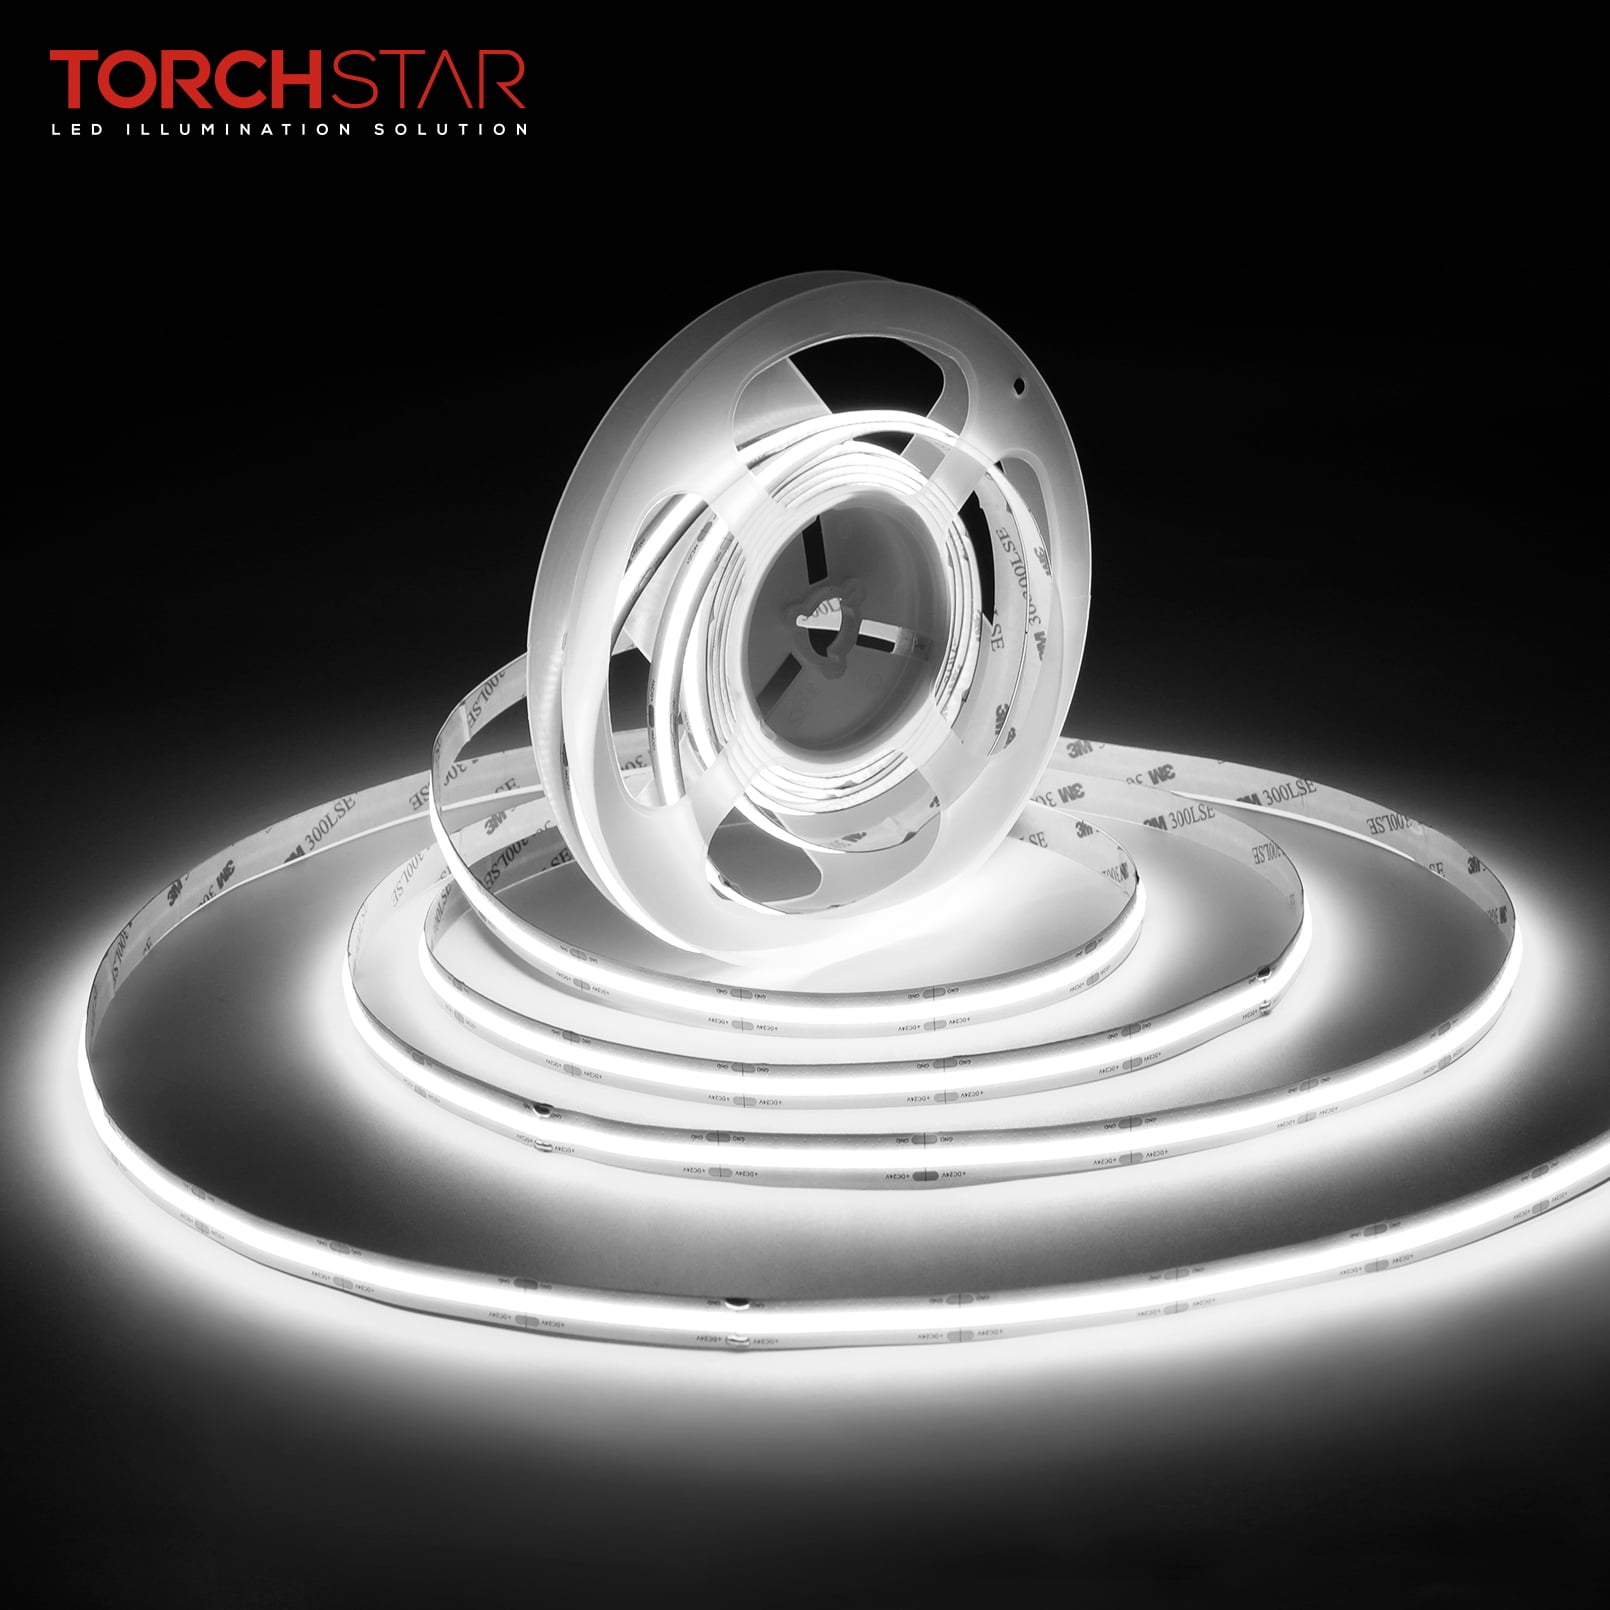 16ft Multicolor Flexible LED Tape Strip Light Kit Waterproof with Remote  Control CycloneSound